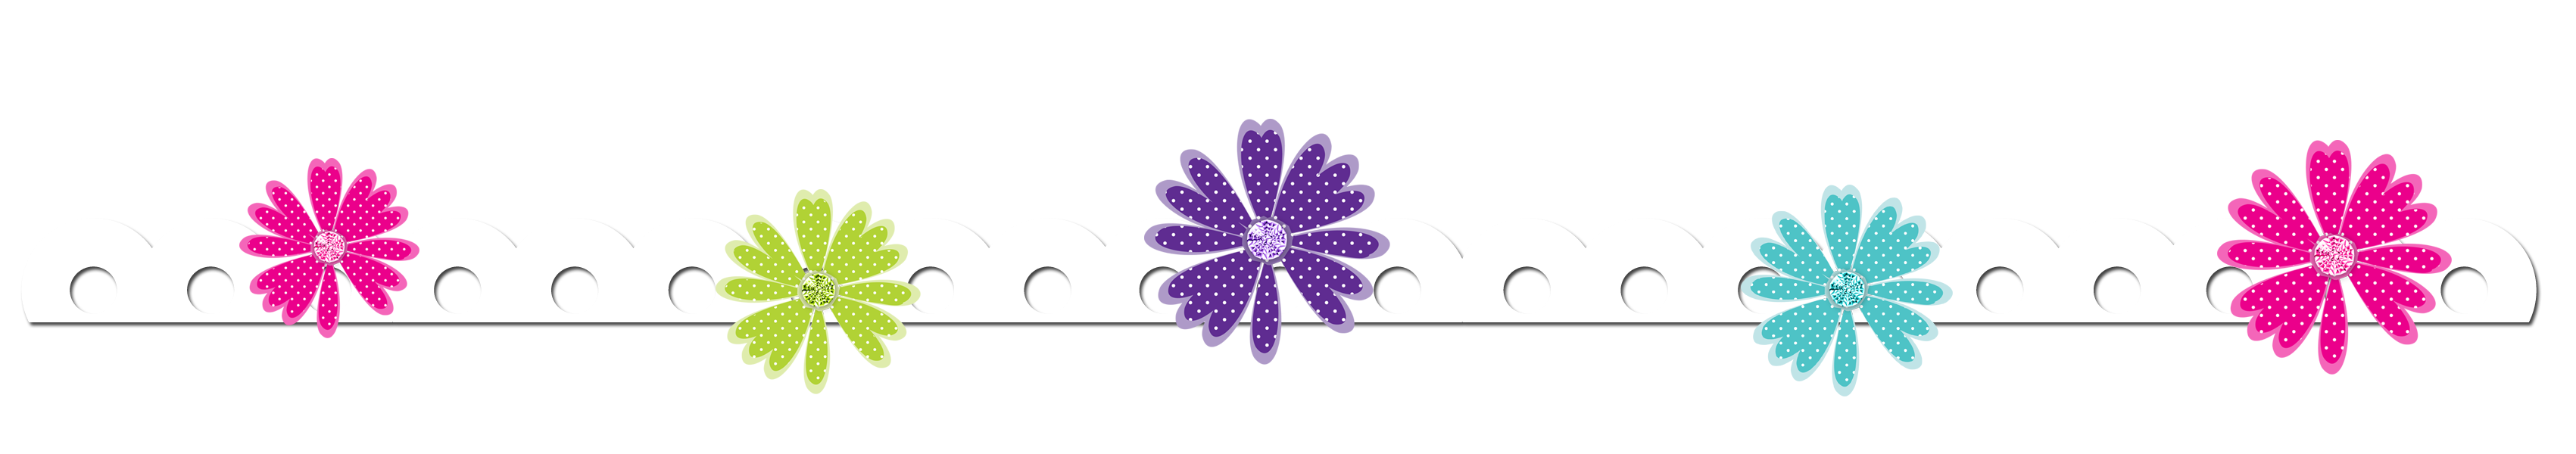 Lilac Flowers Border Clip Art – Clipart Free Download